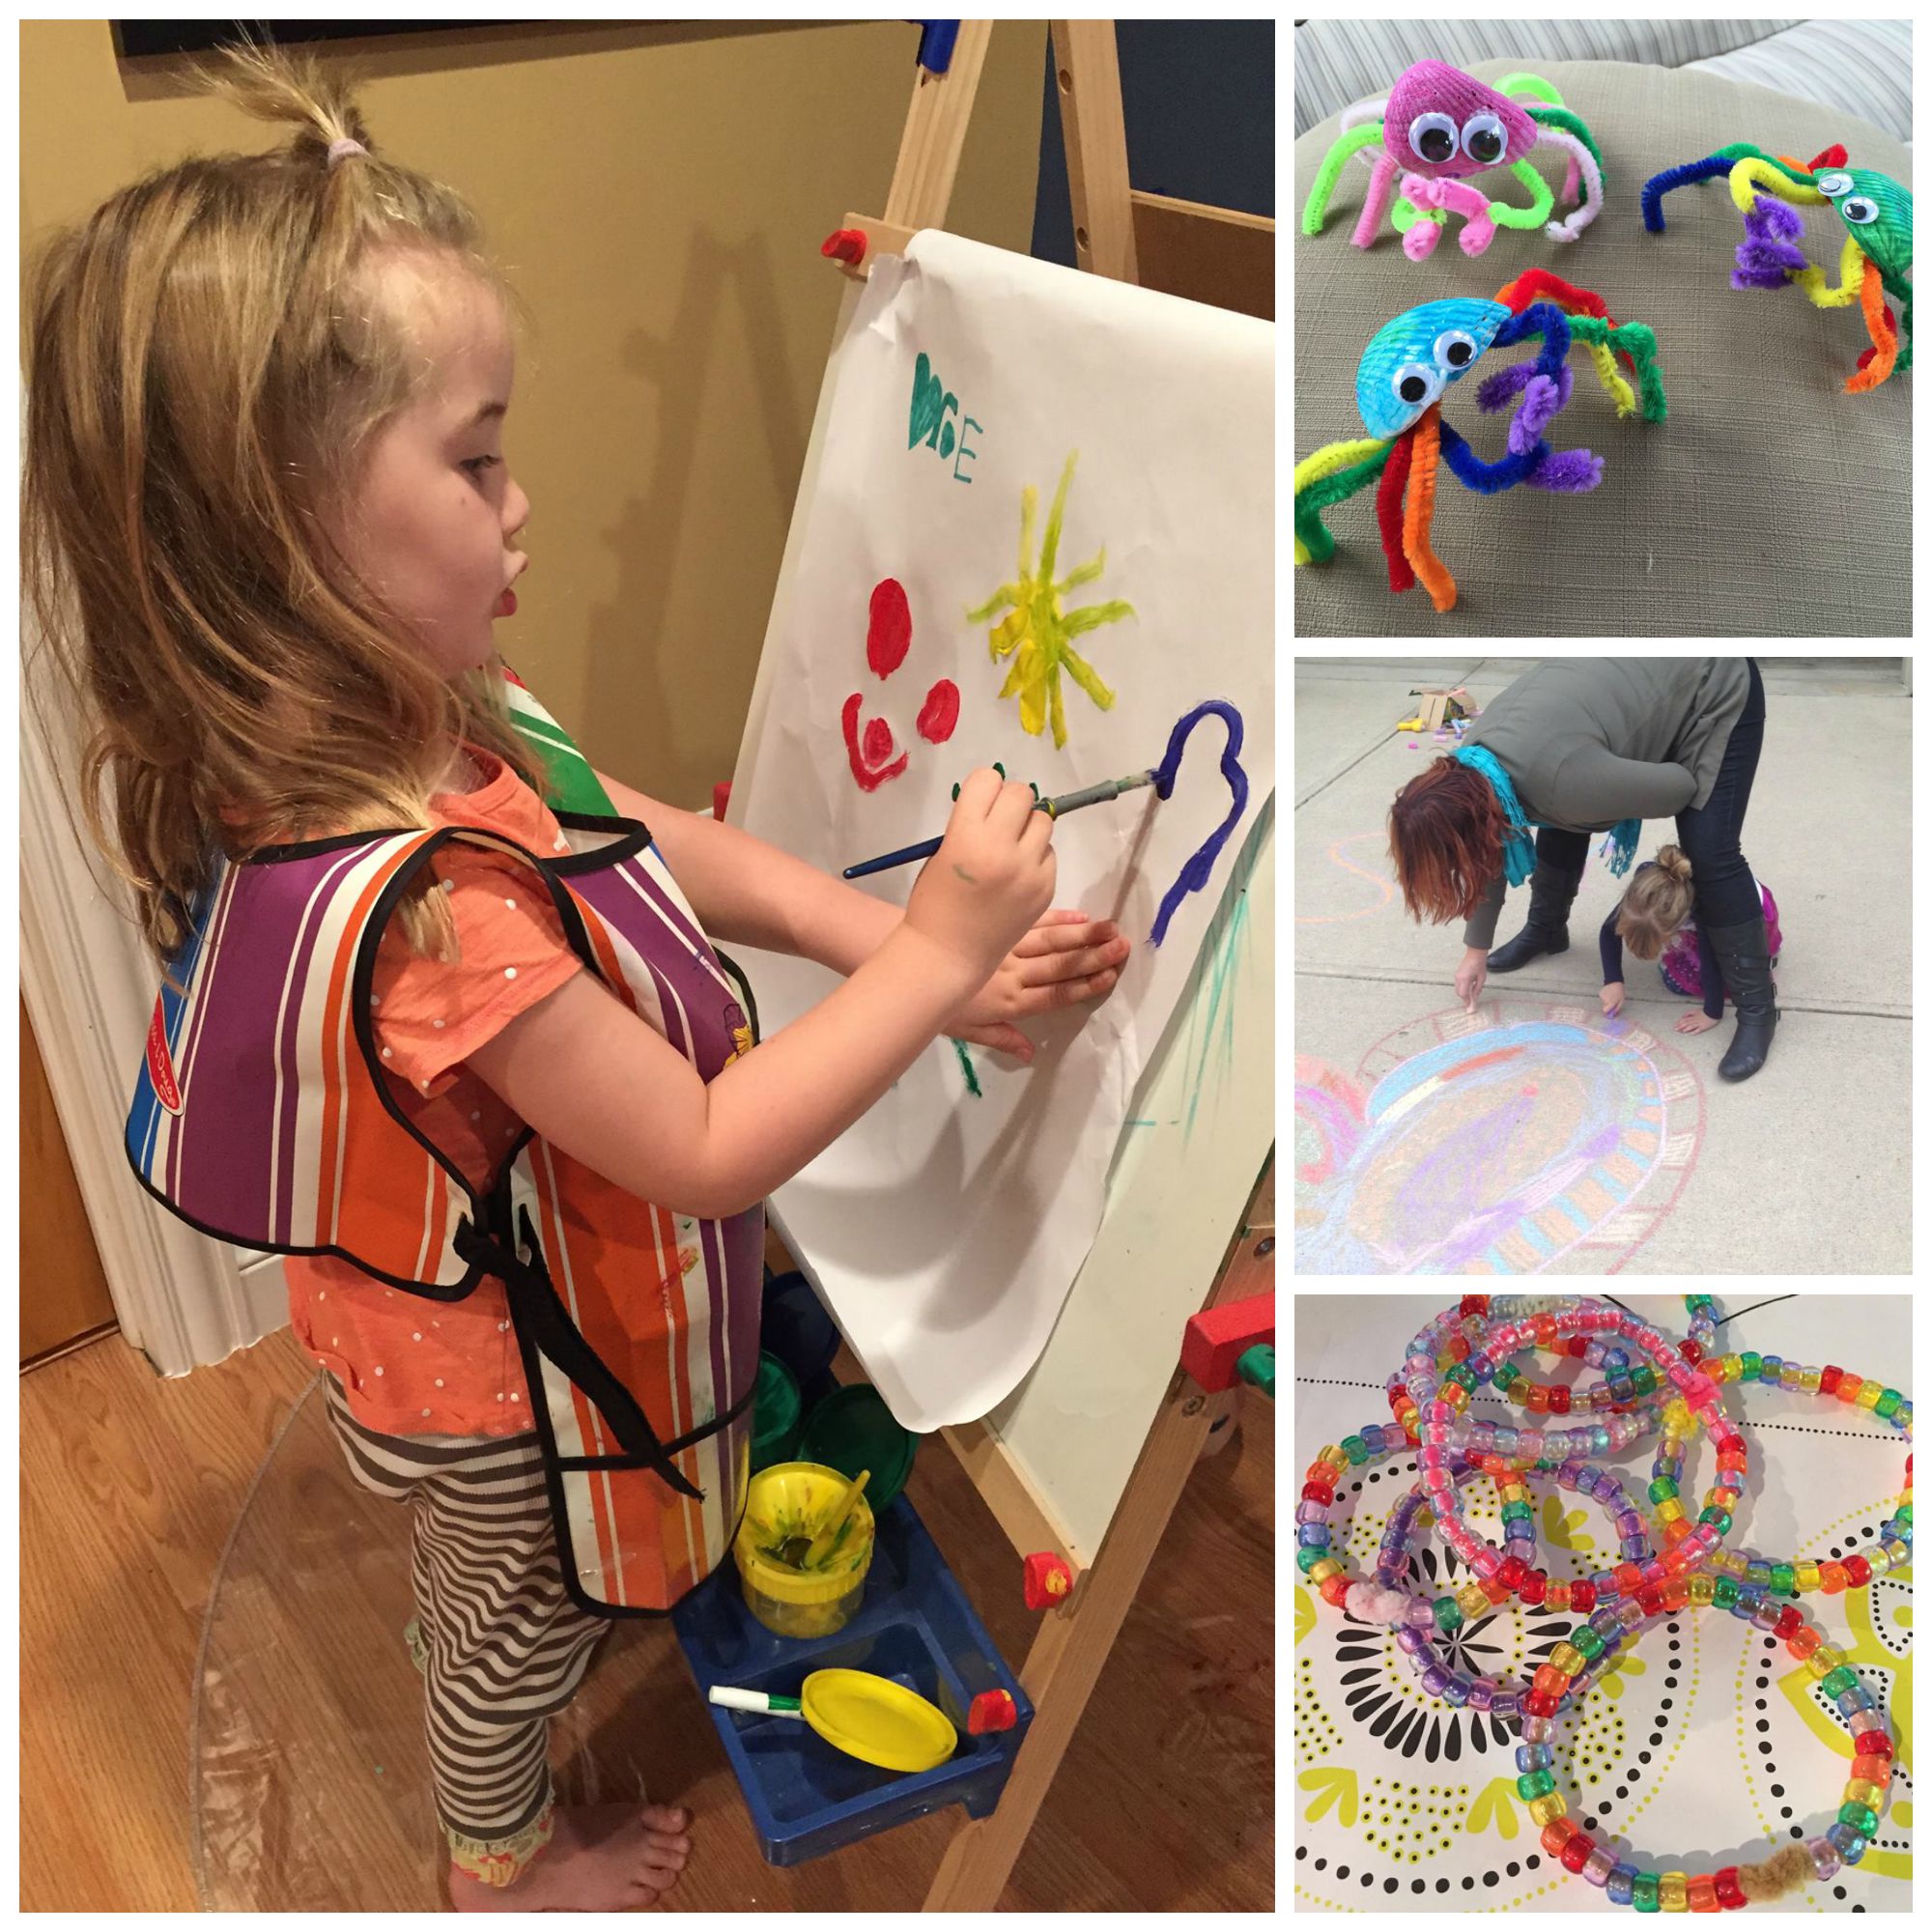 Best Art Supplies for Toddlers - That Kids' Craft Site